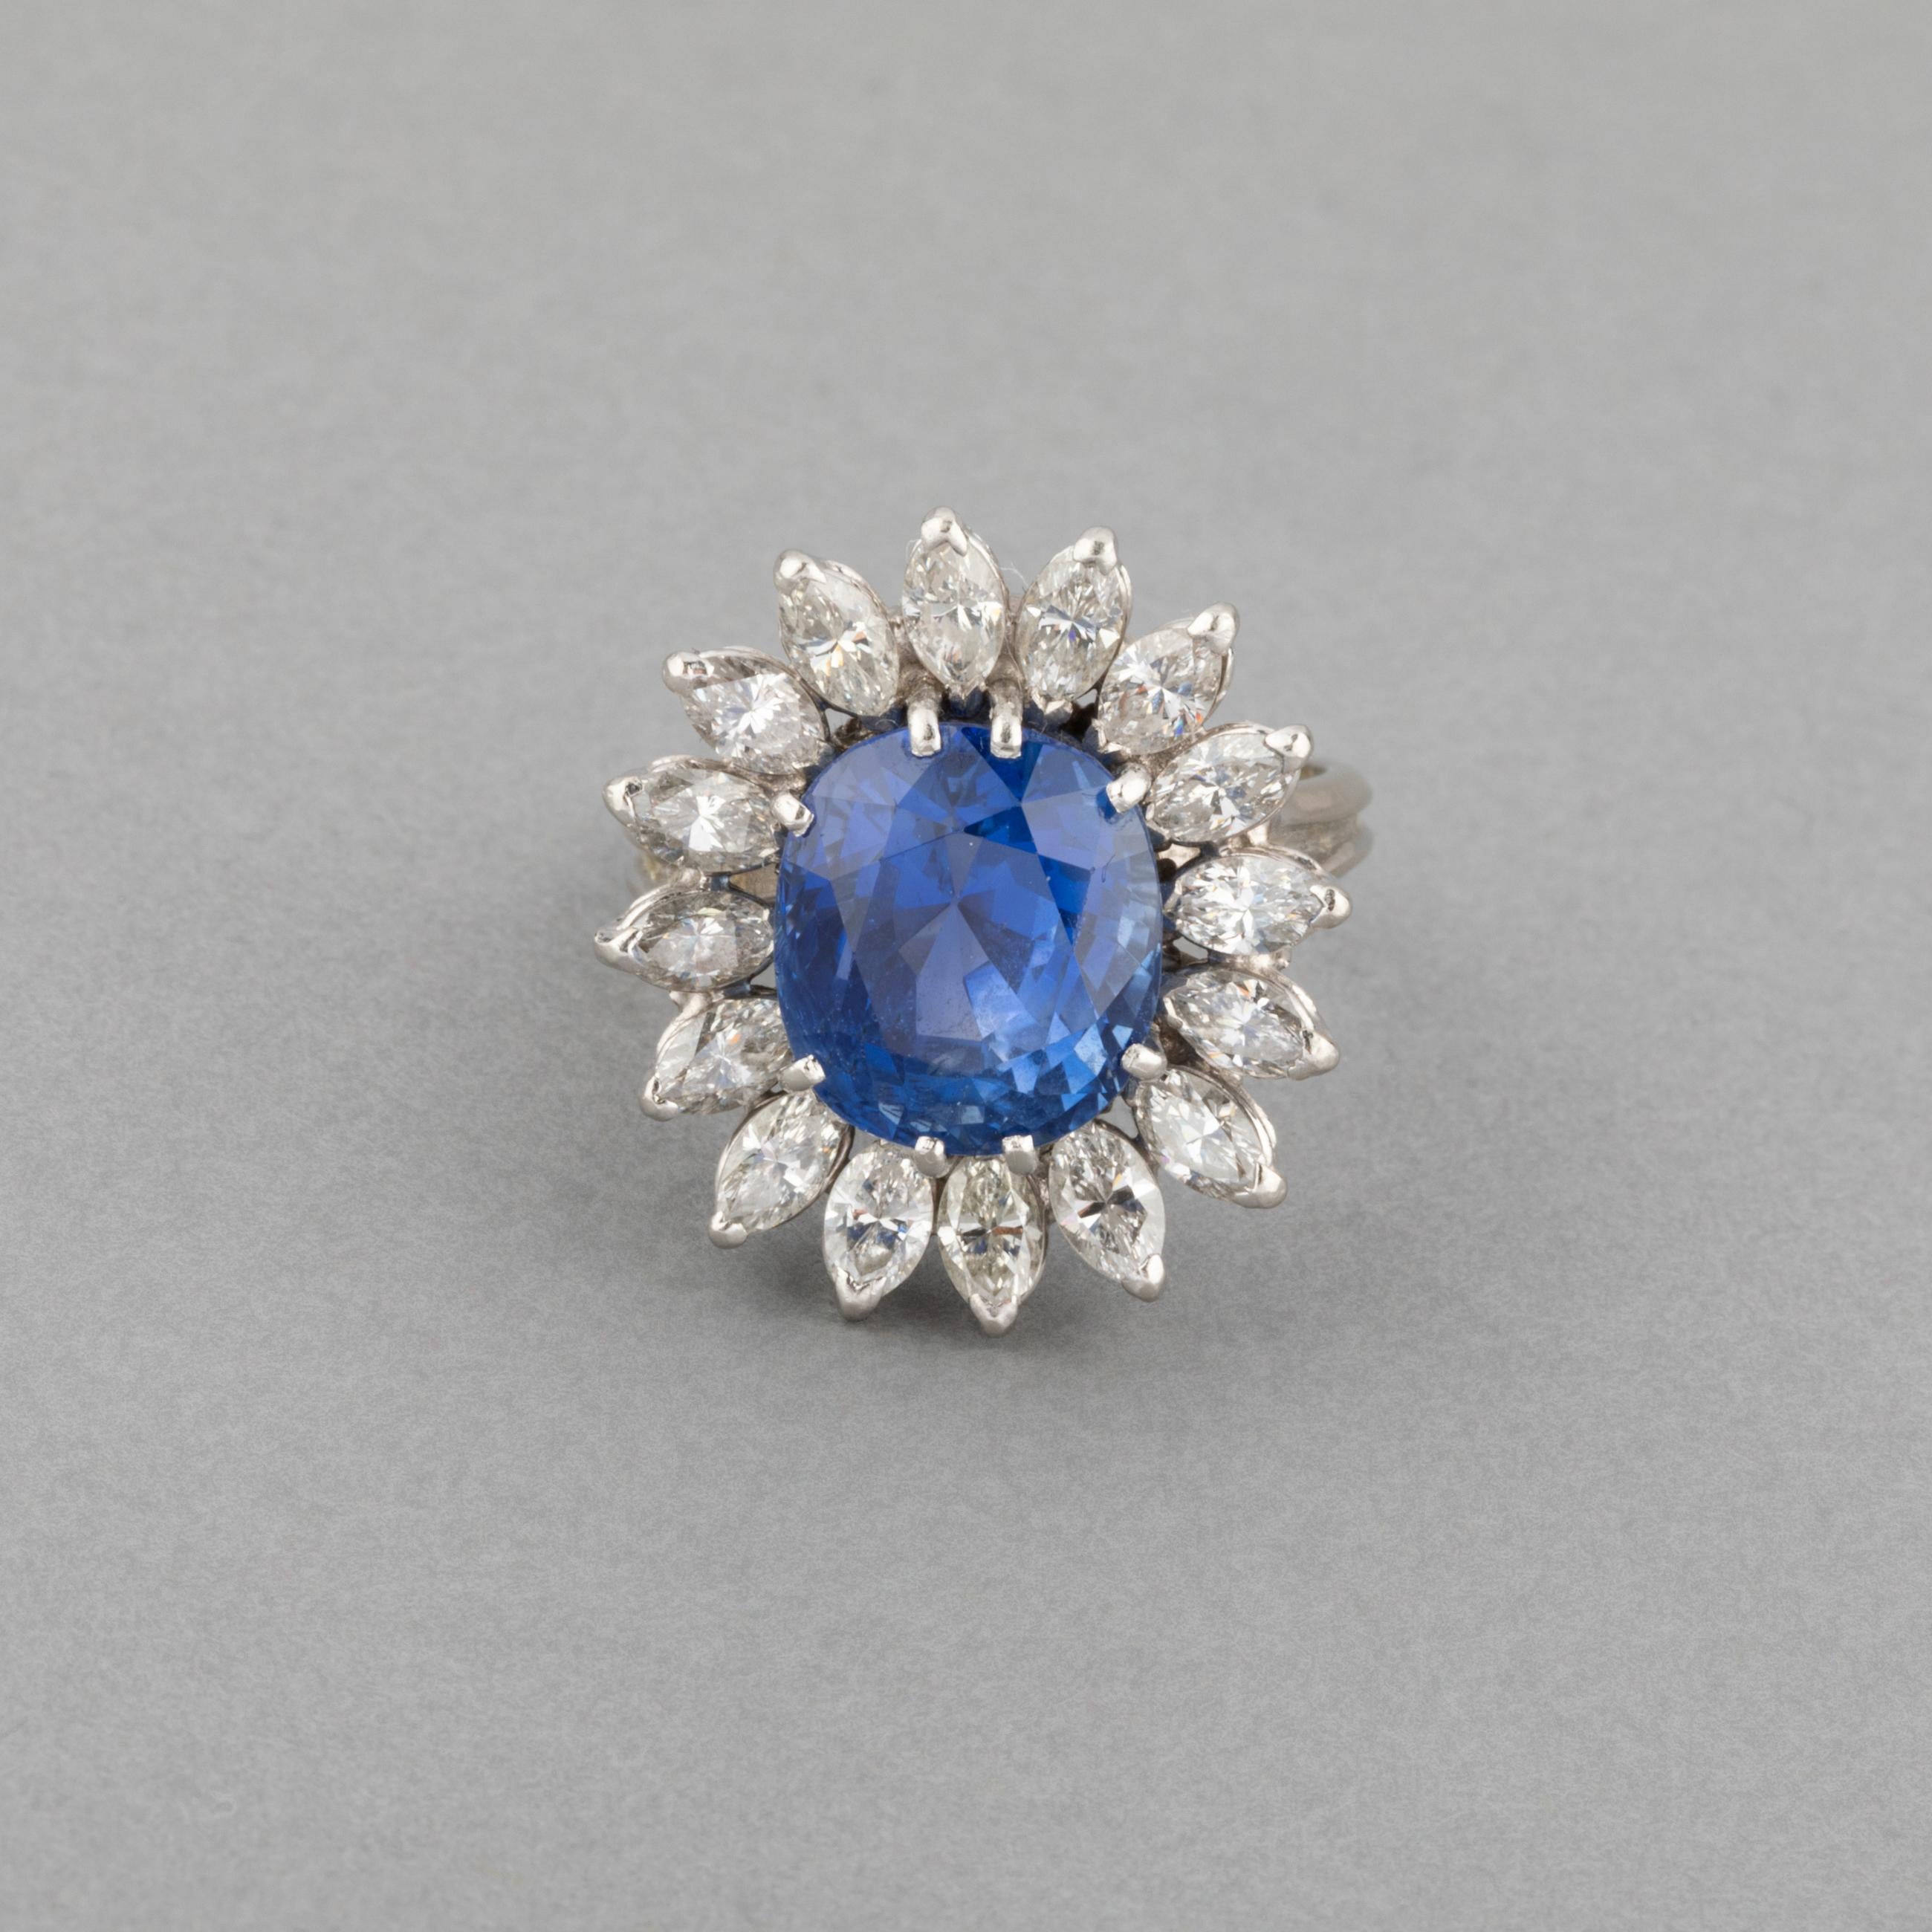 A very beautiful ring, made in France circa 1970.

French hallmark for platinum.

The sapphire has intense blue color and weights approximately 10 carats. Surround by 2 carats of diamonds.

The Certificate is pending.

Dimensions: 22 and 20 mm for